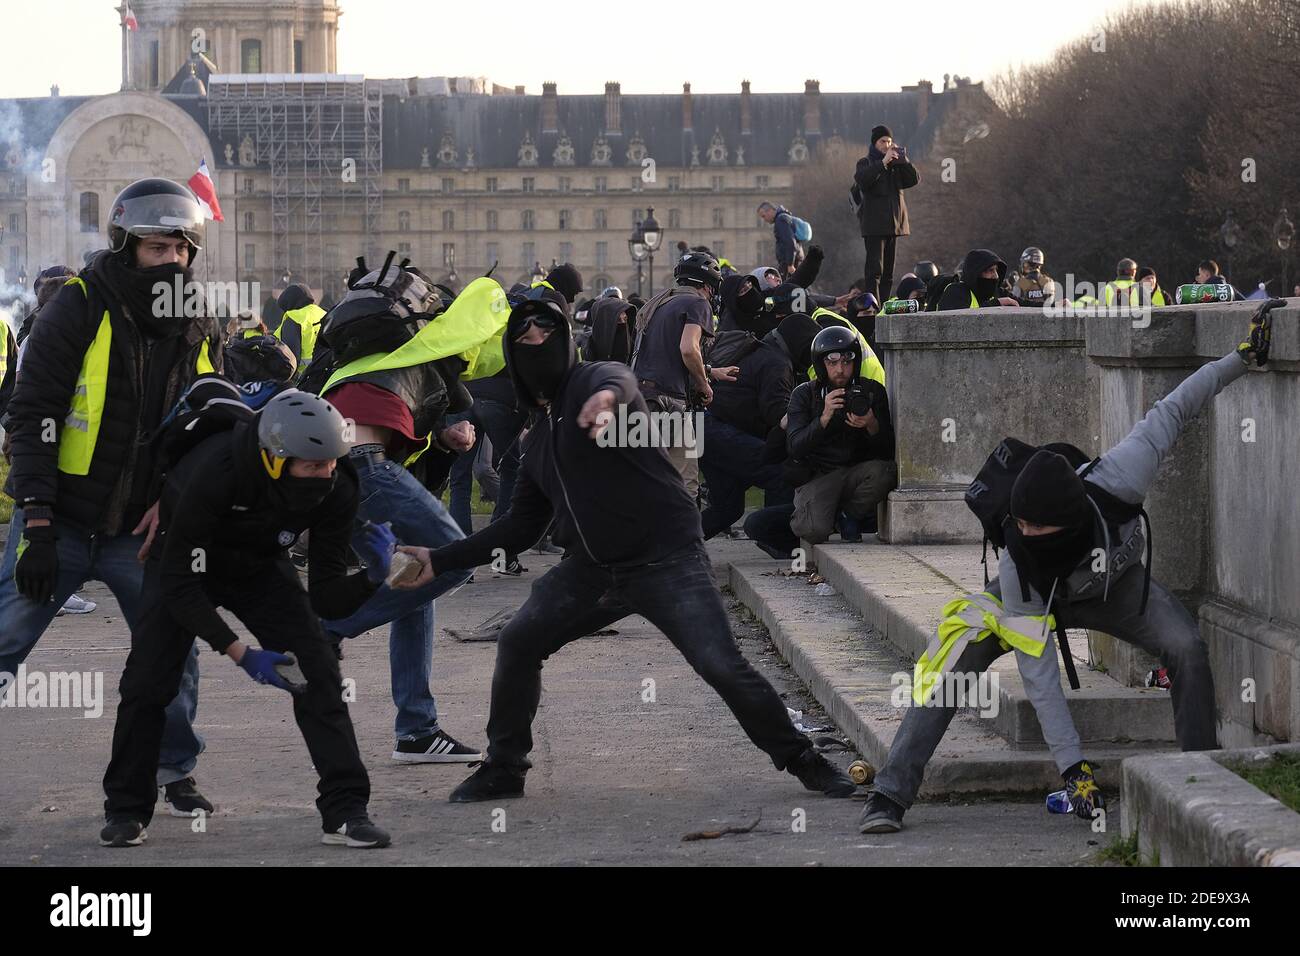 French yellow vests (Gilets jaunes) protesters throw stones during clashes  with French riot police on the Esplanade des Invalides during the 14th  consecutive week of nationwide Yellow Vest (Gilets Jaunes) movement protests